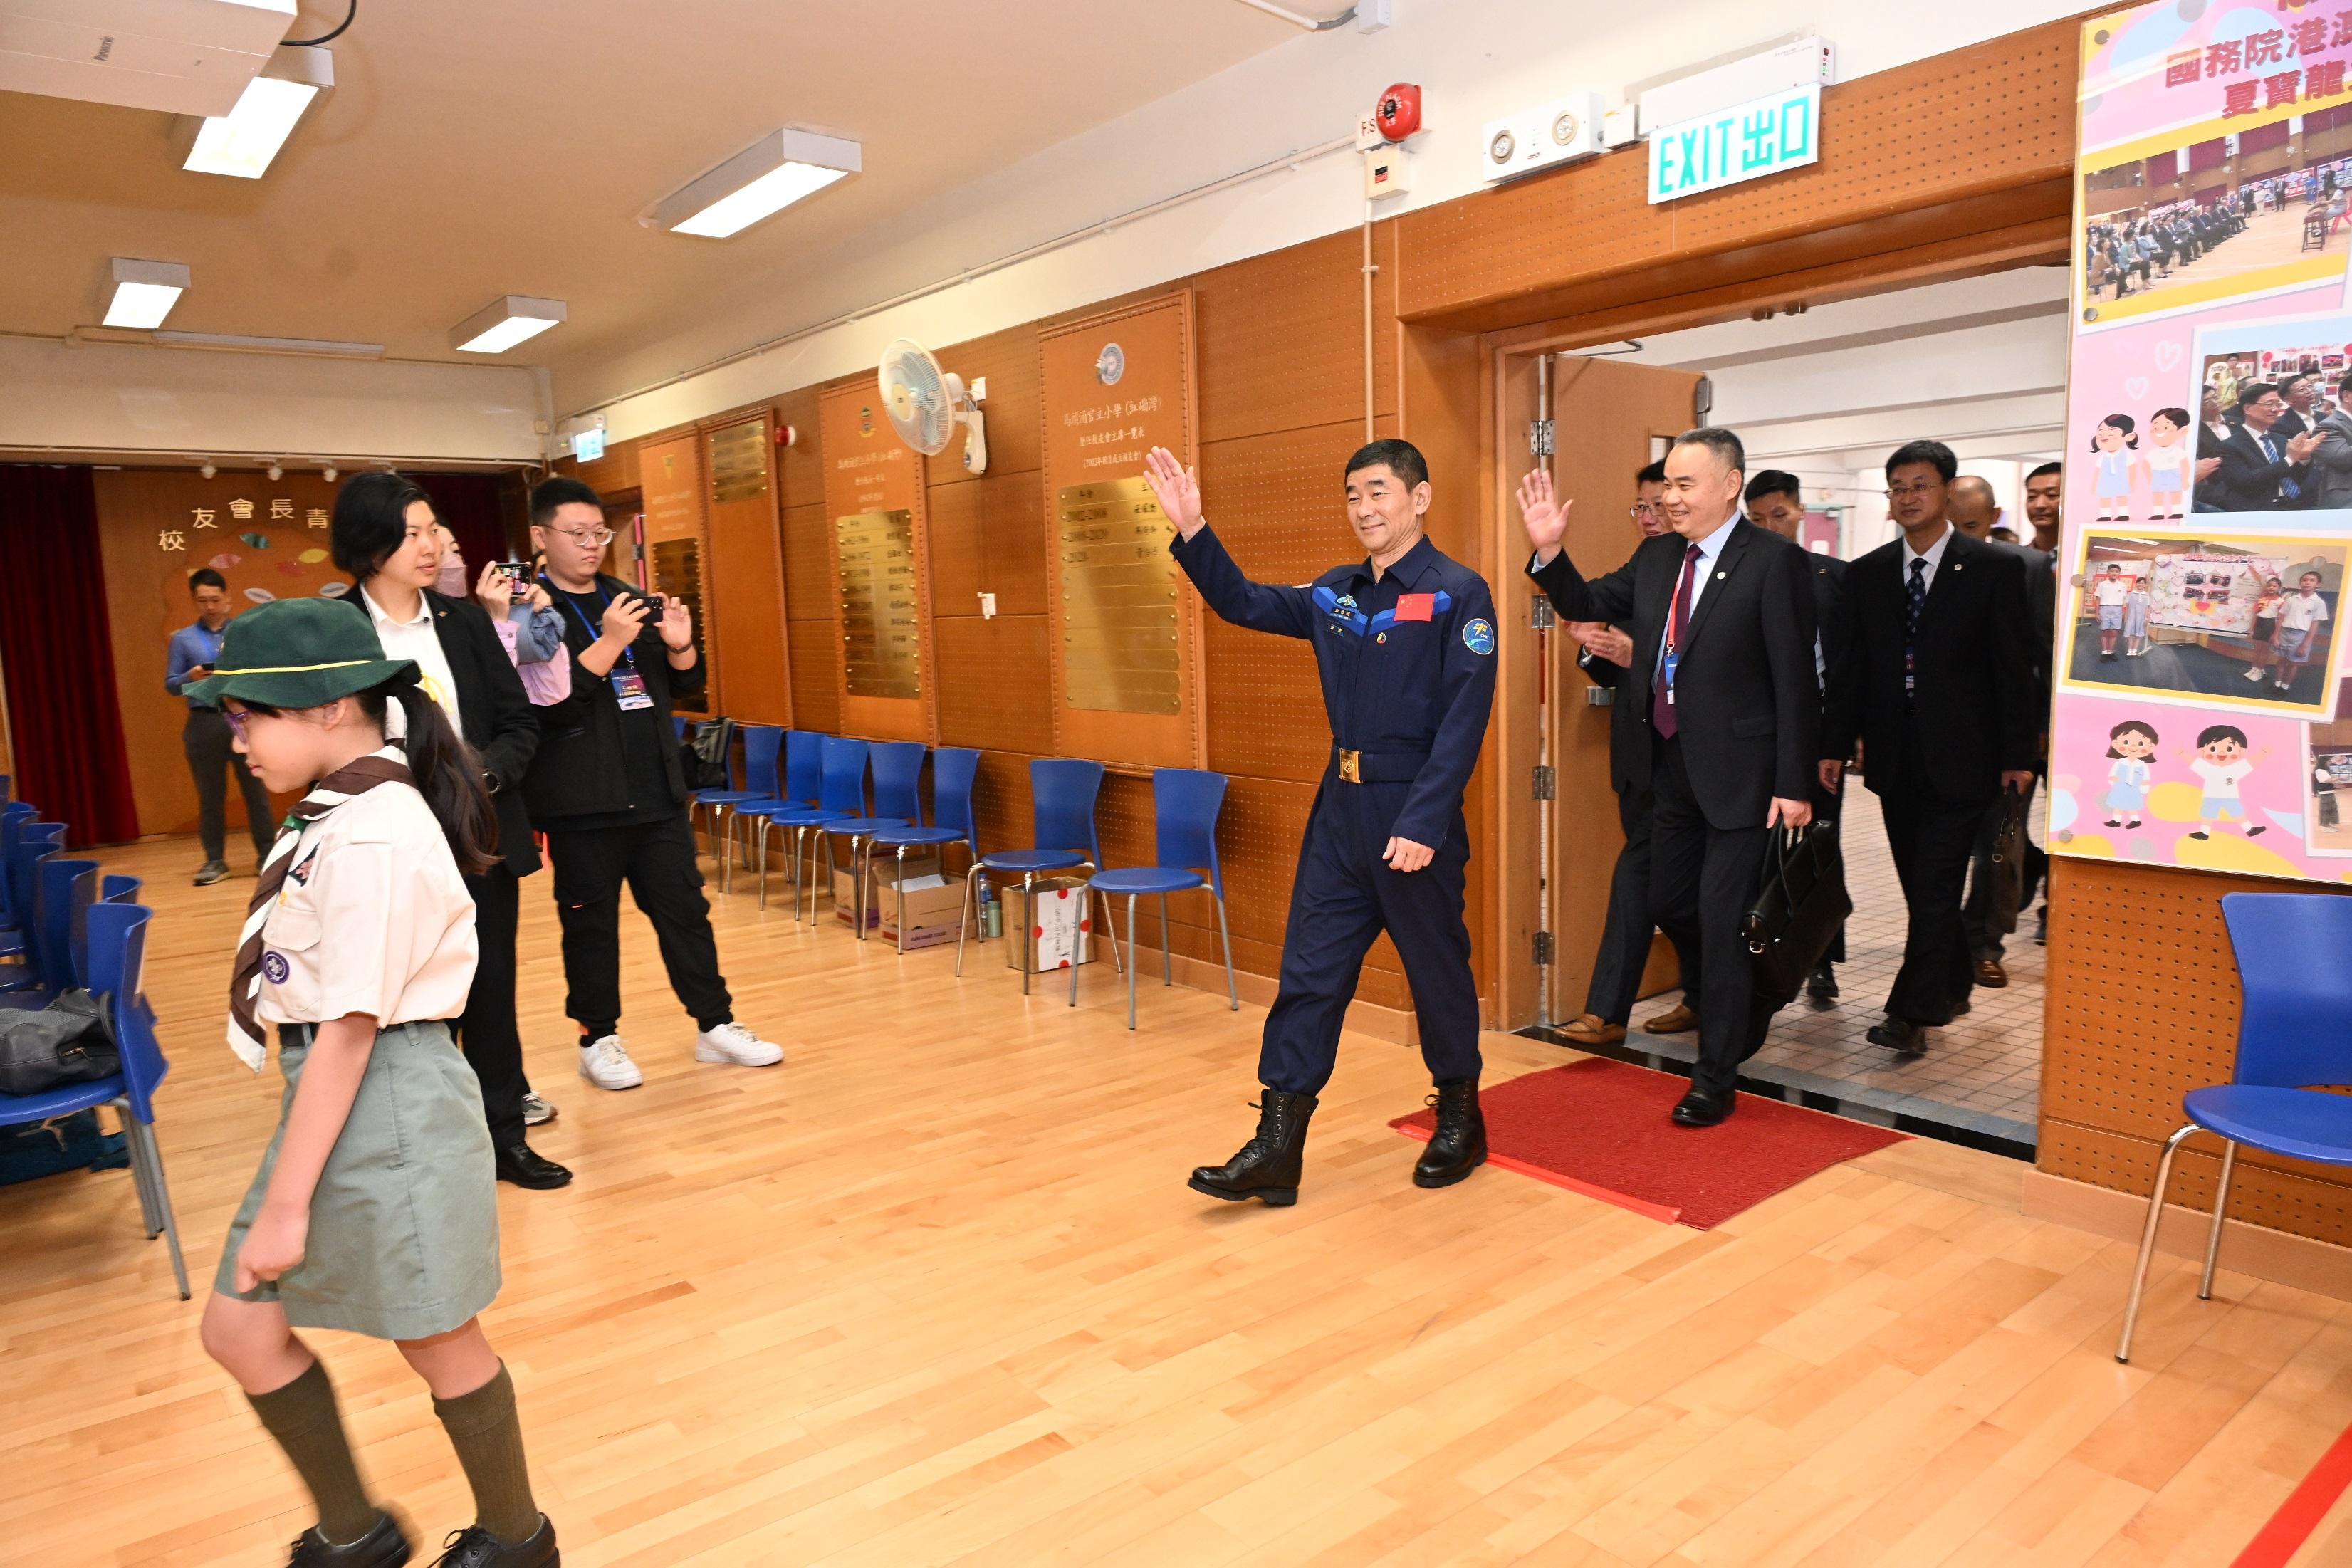 The China Manned Space delegation continued their visit in Hong Kong today (November 29). Photo shows Shenzhou-12 astronaut Mr Liu Boming (centre), together with the delegation members, attending a dialogue session with students at Ma Tau Chung Government Primary School (Hung Hom Bay).